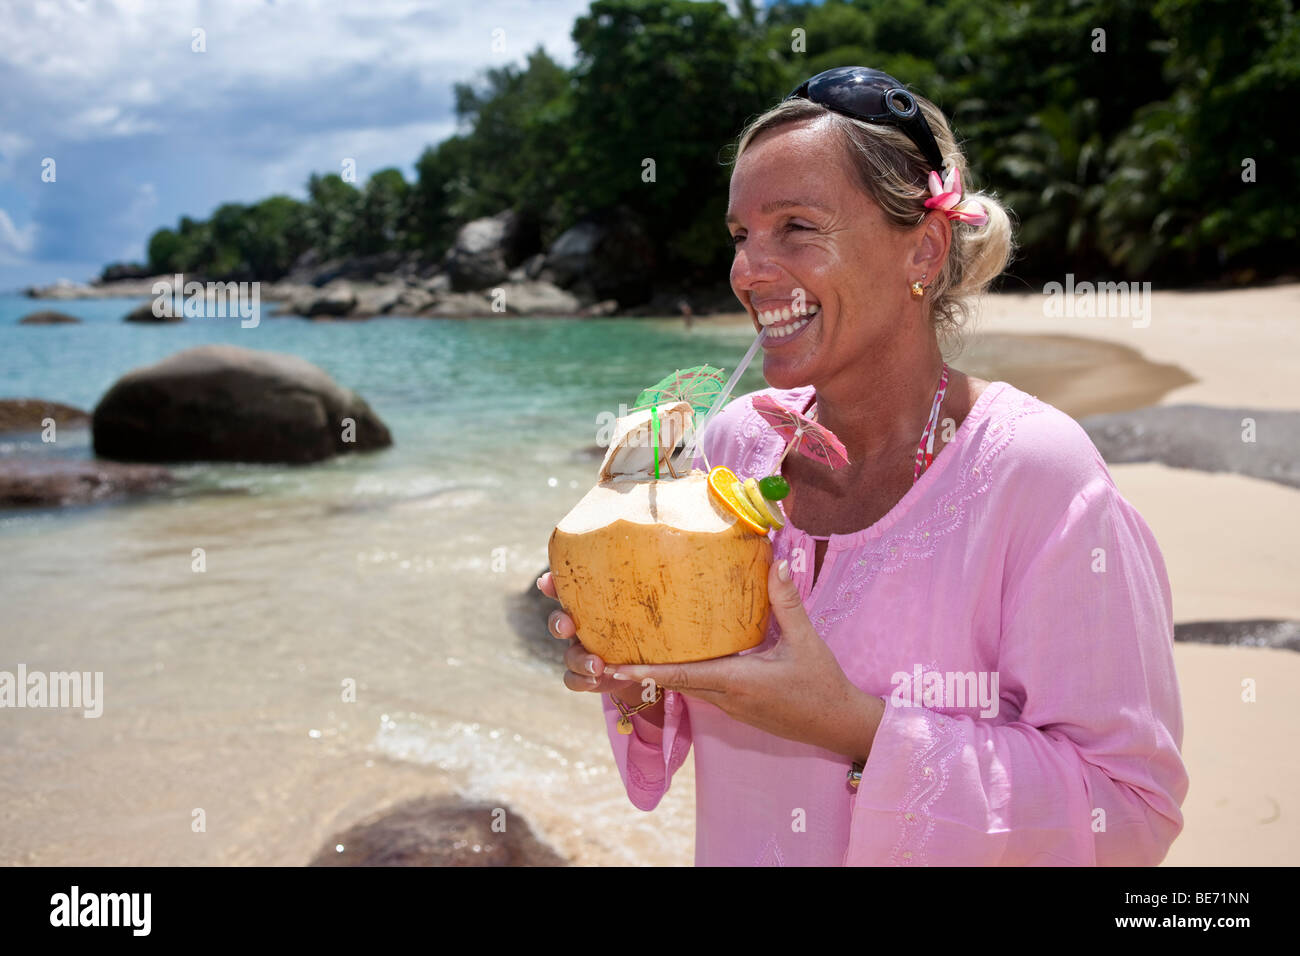 A woman in a pink tunic drinking from a decorated coconut filled with a drink, island Mahe, Seychelles, Indian Ocean, Africa Stock Photo